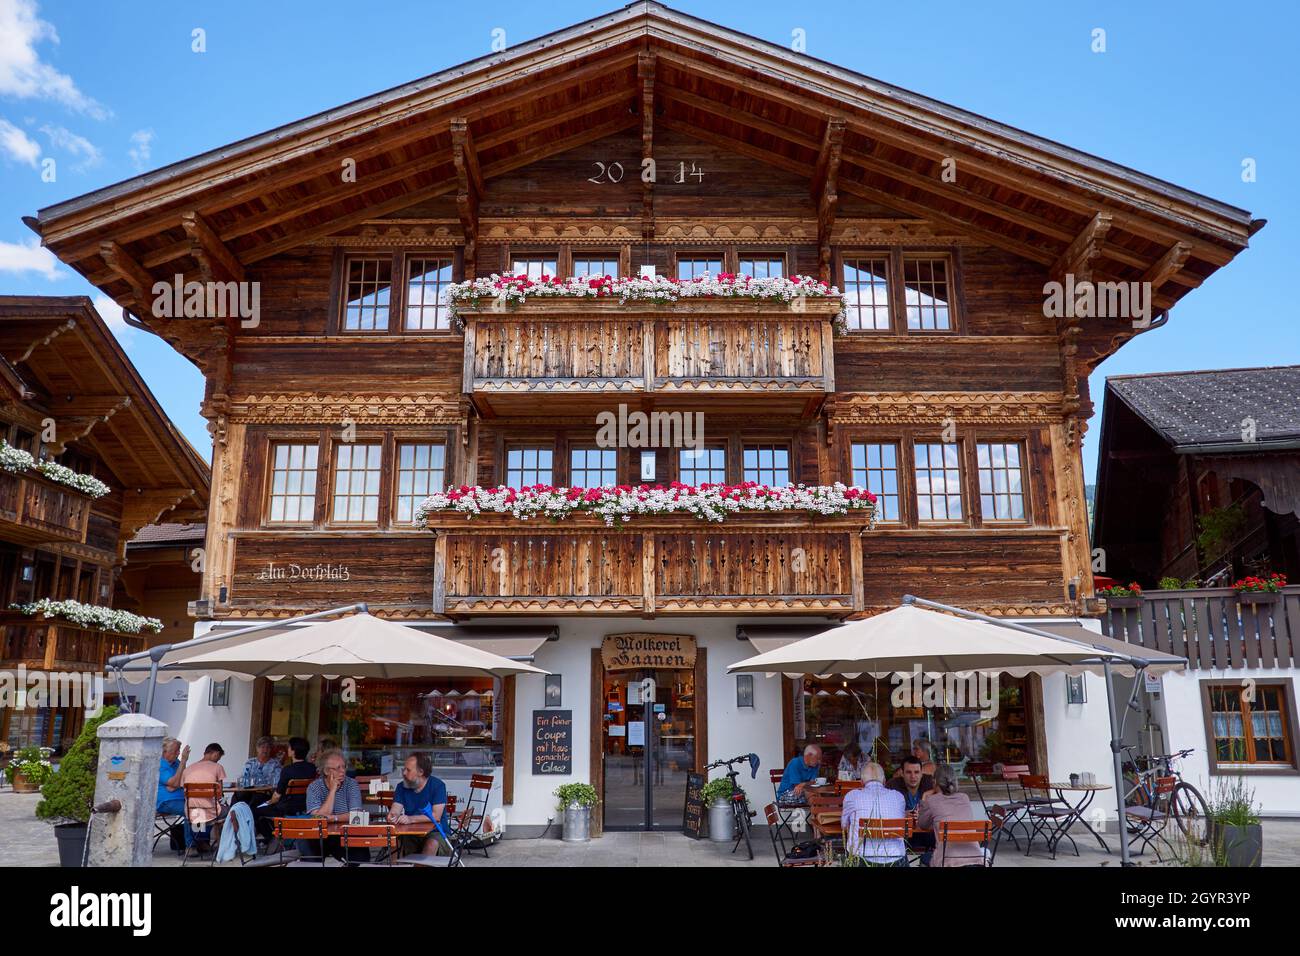 Cafe restaurant and shop in a chalet in central Saanen village - Bernese Oberland, Switzerland Stock Photo